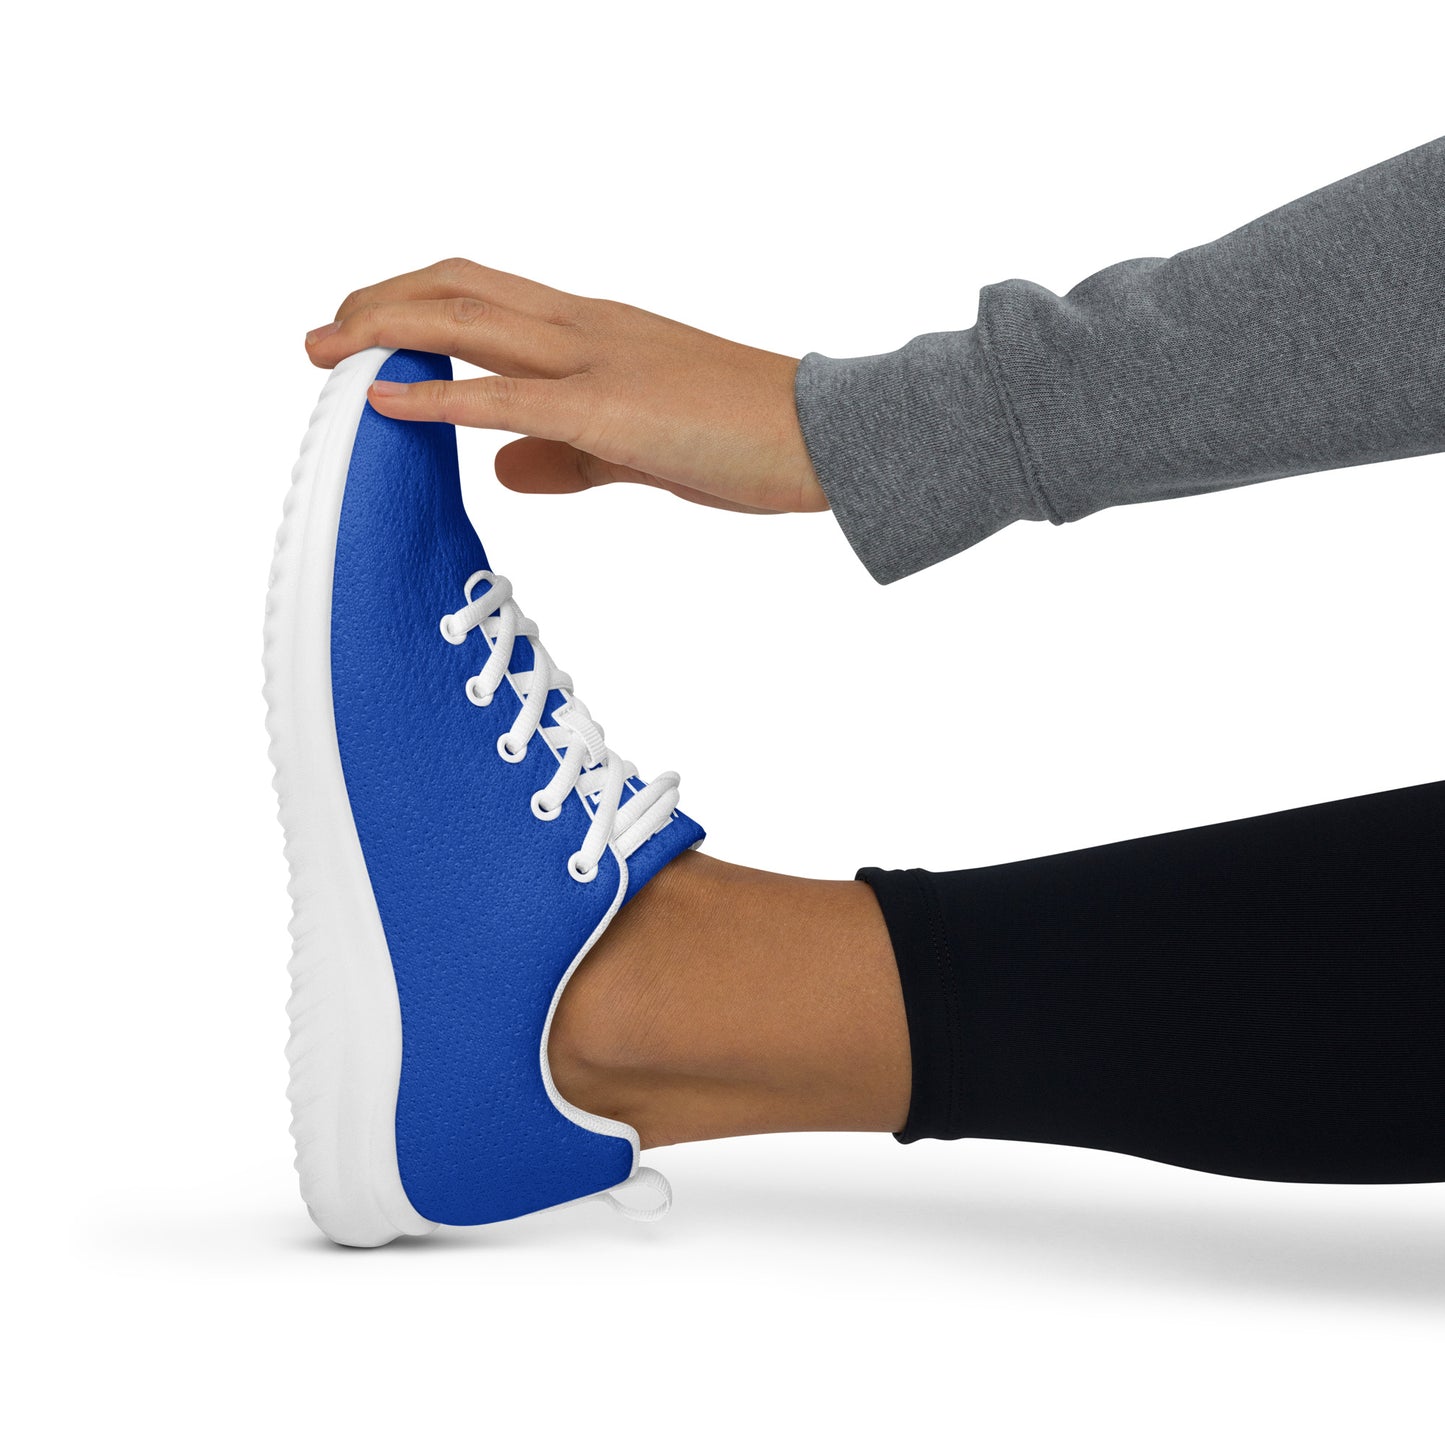 Sixty Eight 93 Logo White Blue Women’s Athletic Shoes